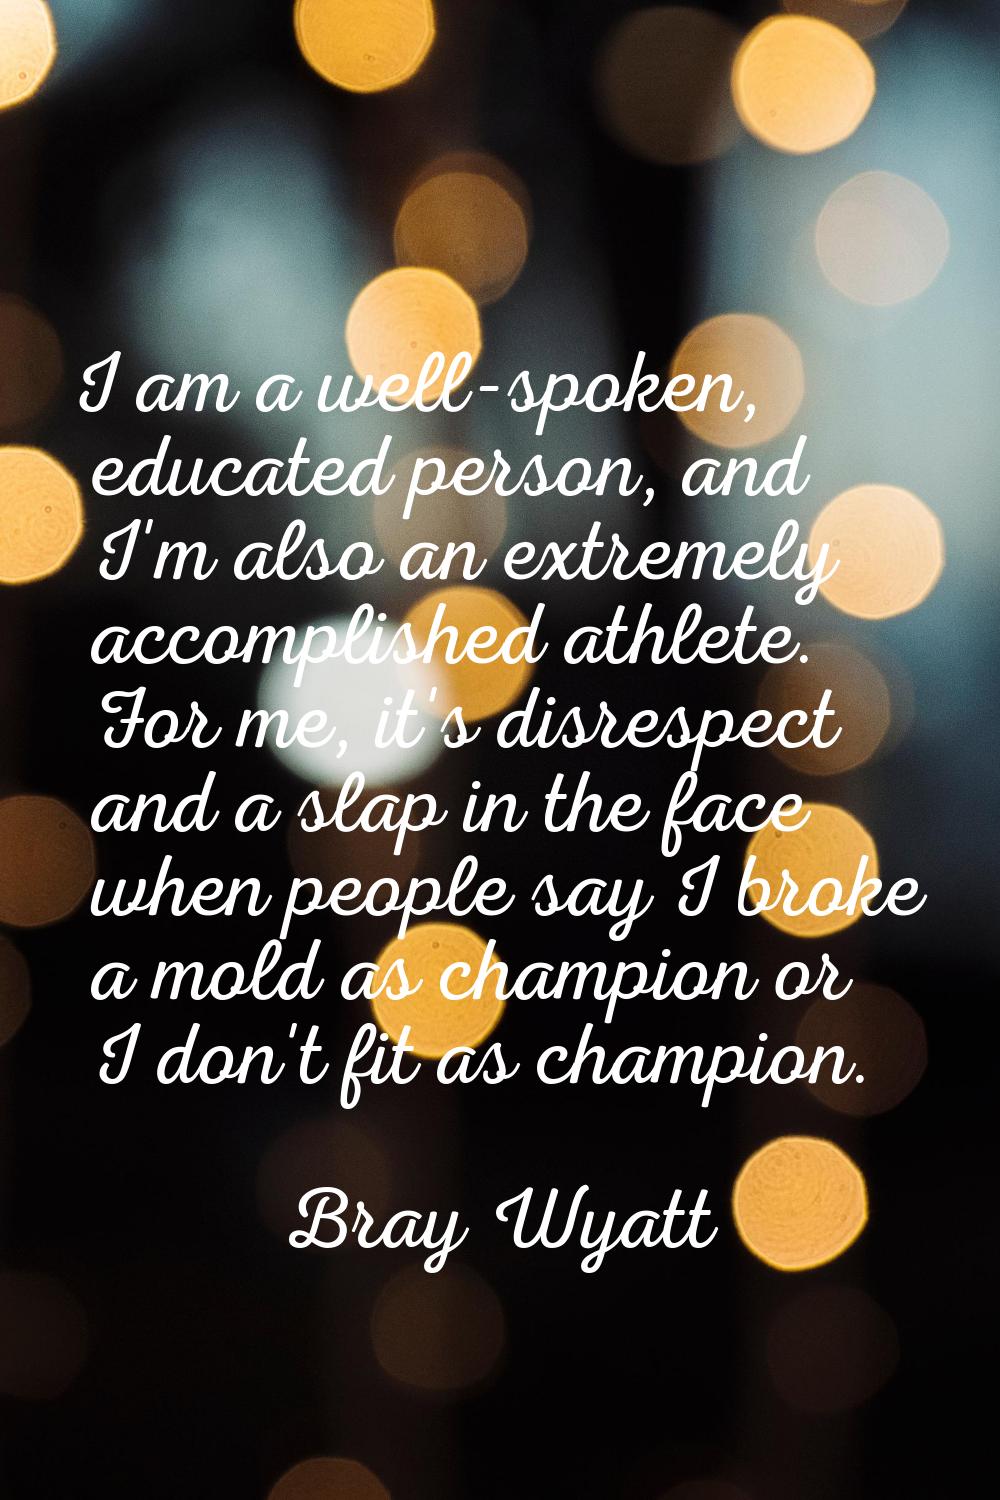 I am a well-spoken, educated person, and I'm also an extremely accomplished athlete. For me, it's d